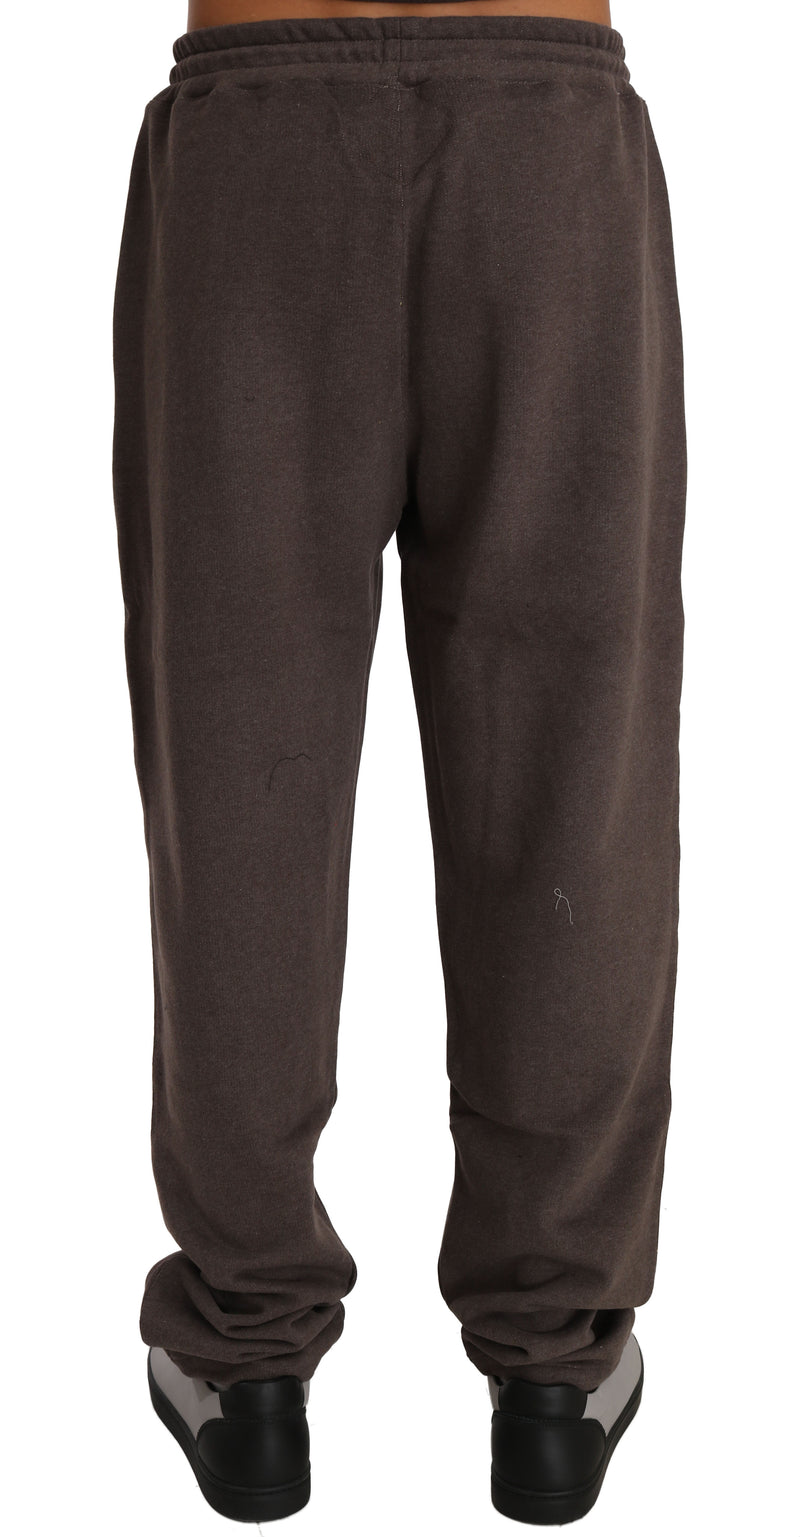 Brown Cotton Sweater Pants Tracksuit